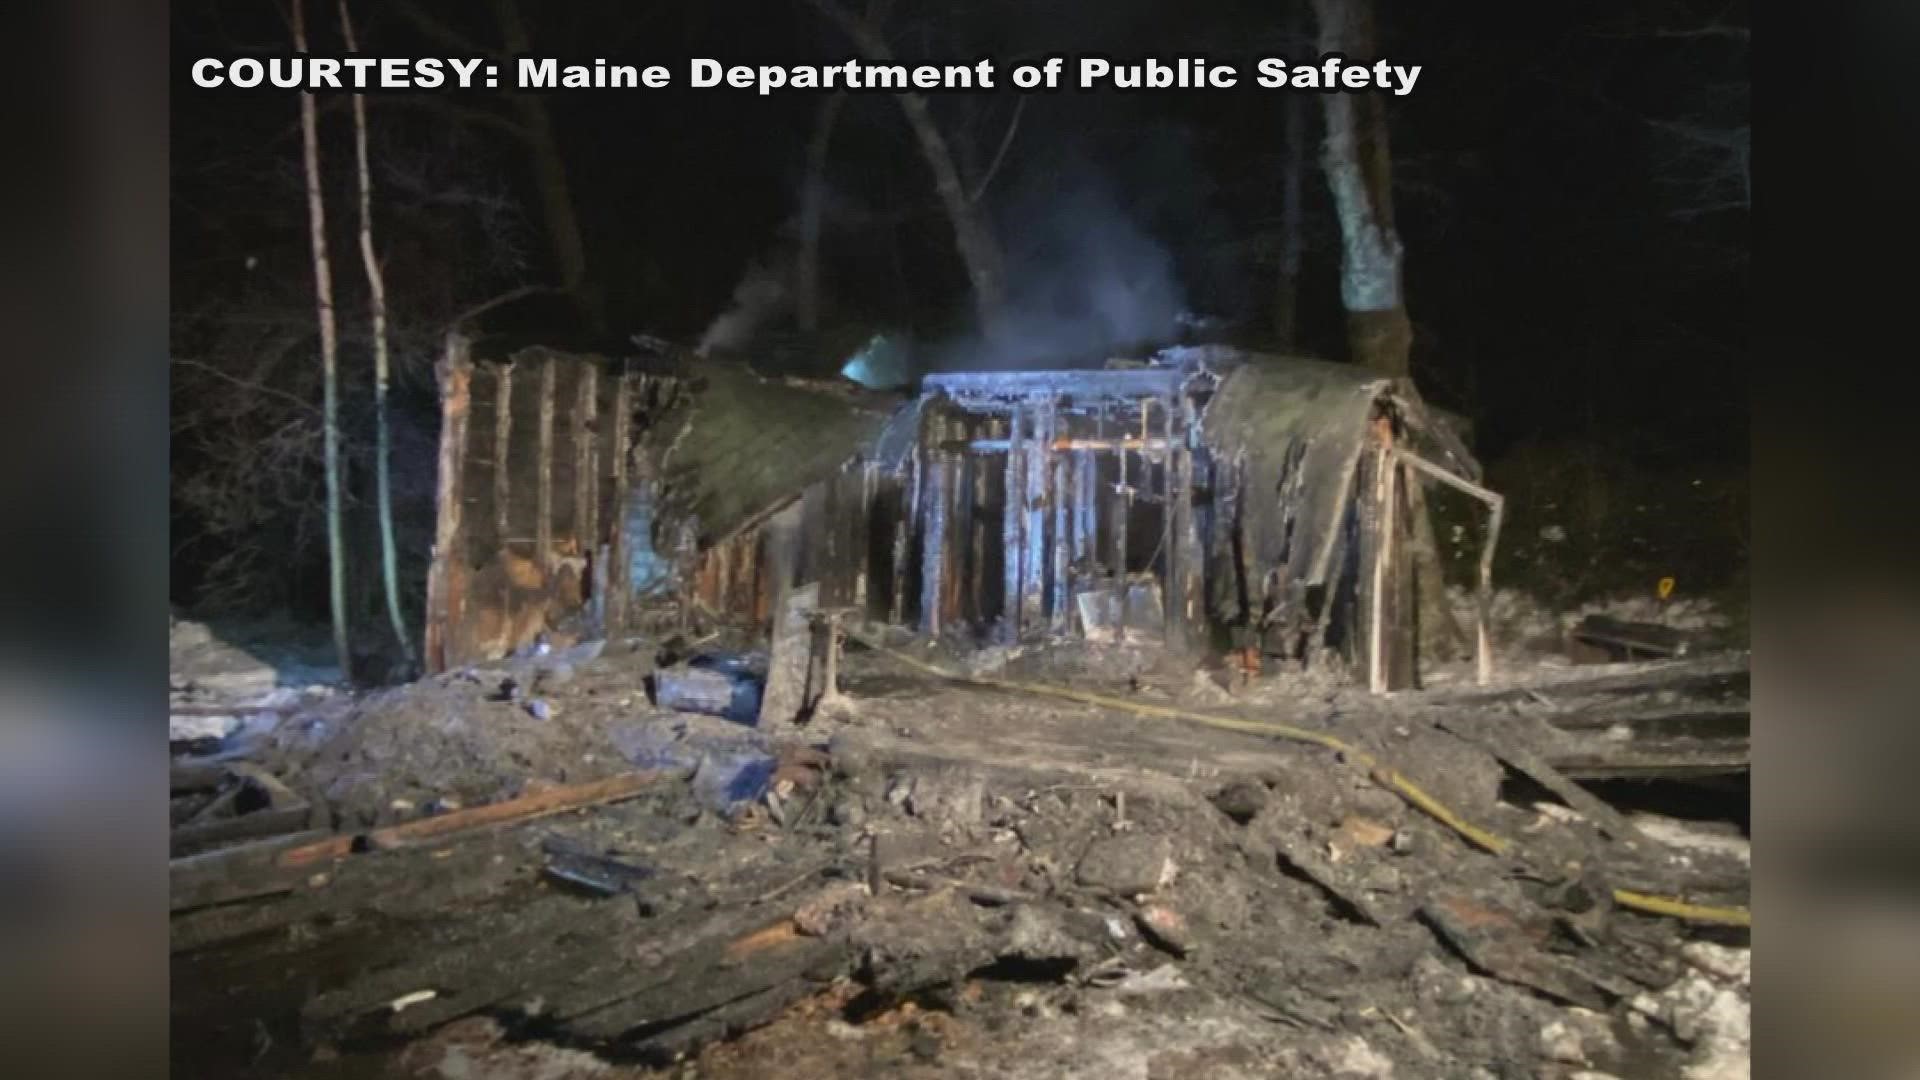 The fire was reported at a home on Kennebec Road around 10:30 Monday night, and investigators believe it was Paul Spaulding’s remains that were found inside.